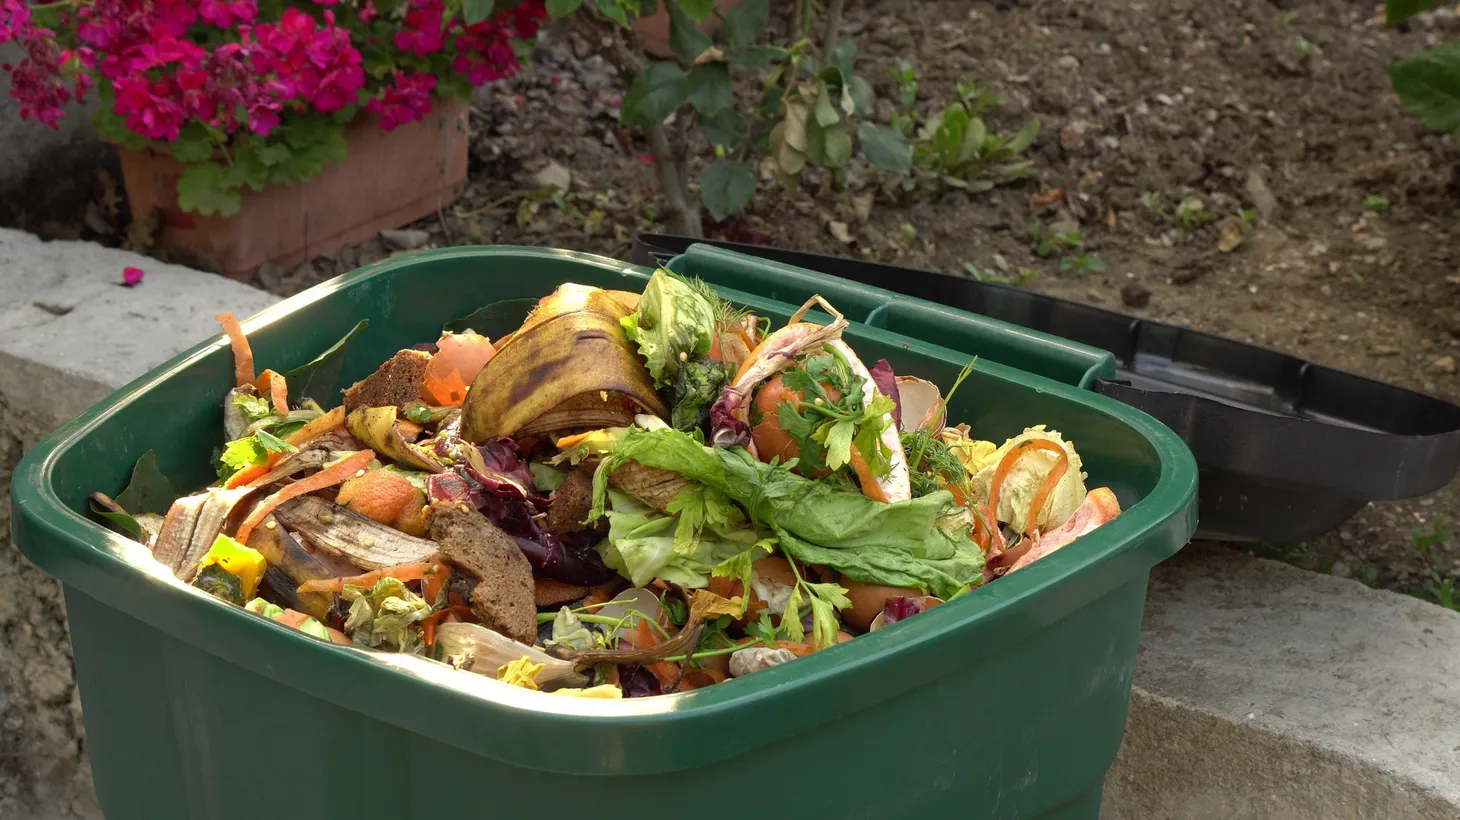 For some residents, composting is as easy as throwing their food scraps into the green bin. But some cities, landlords and businesses have been slow to roll out their programs.